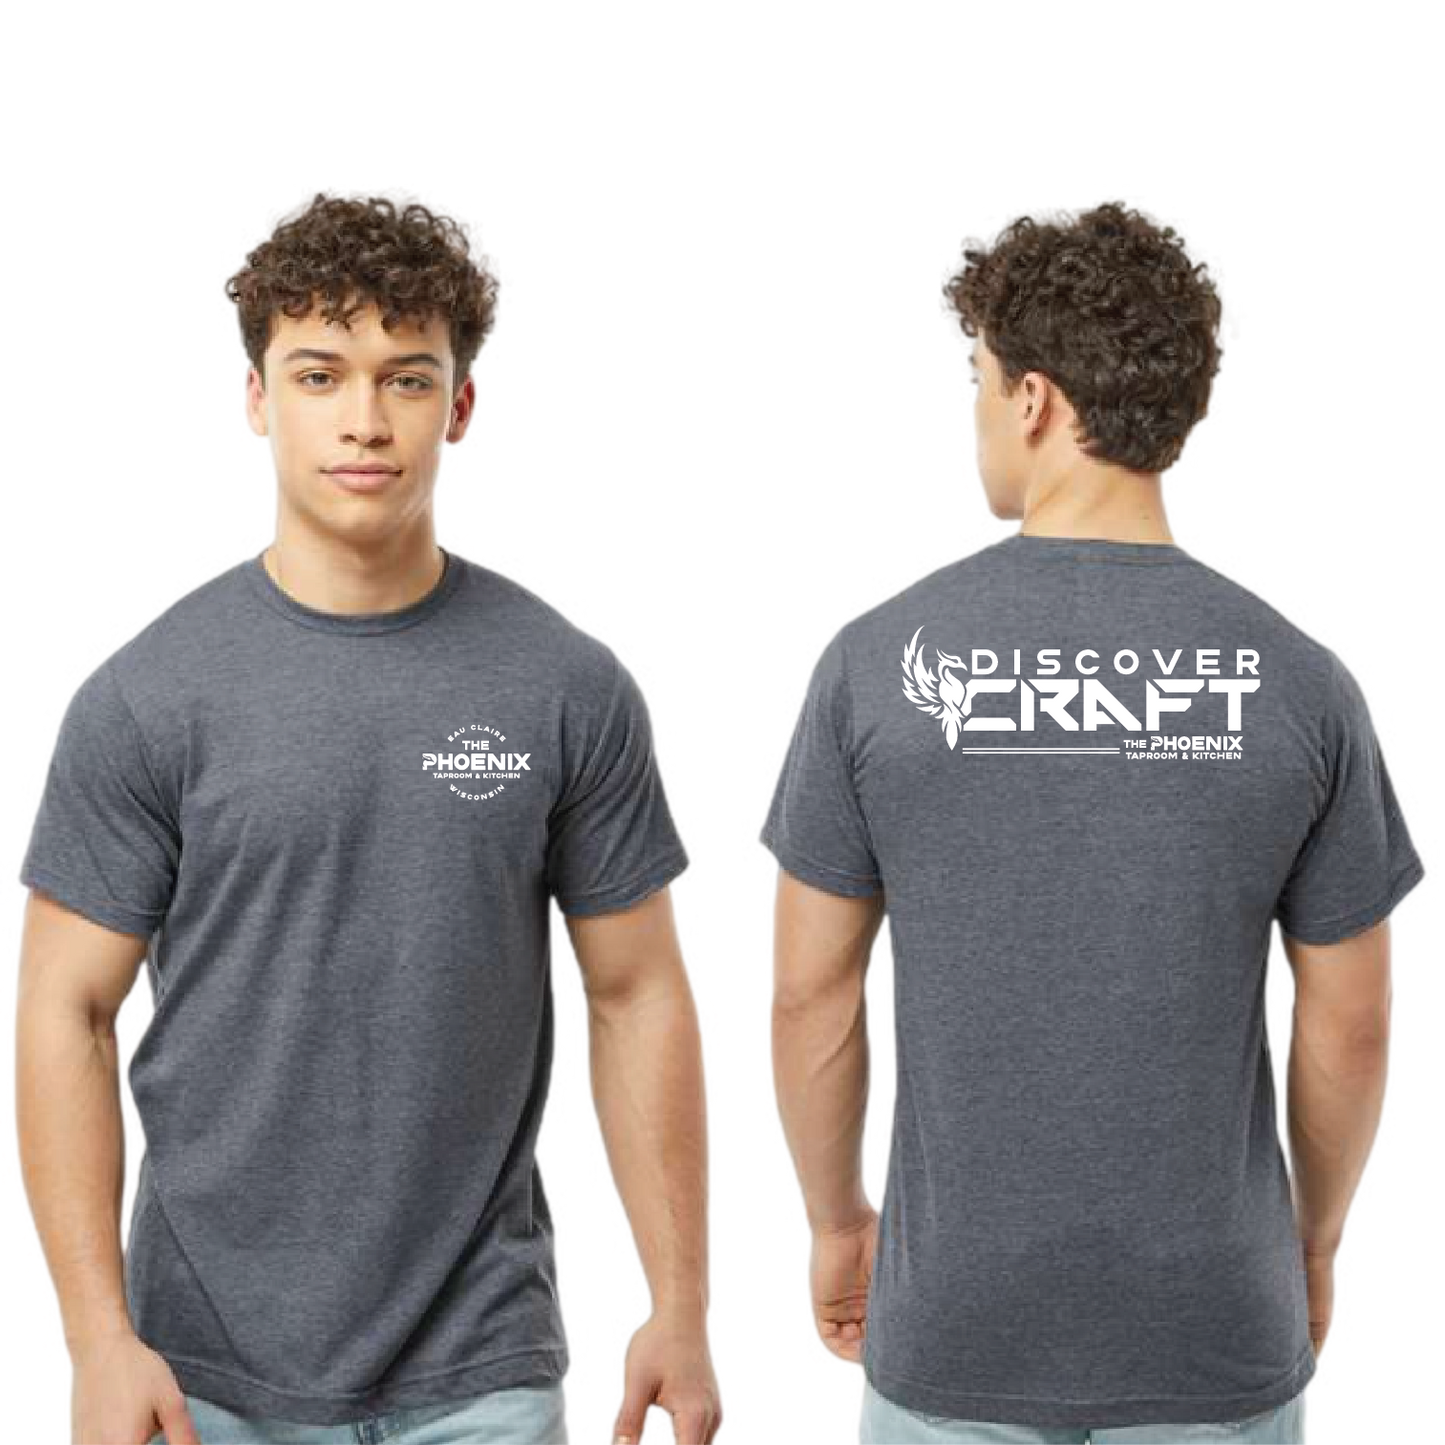 Discover Craft Tee